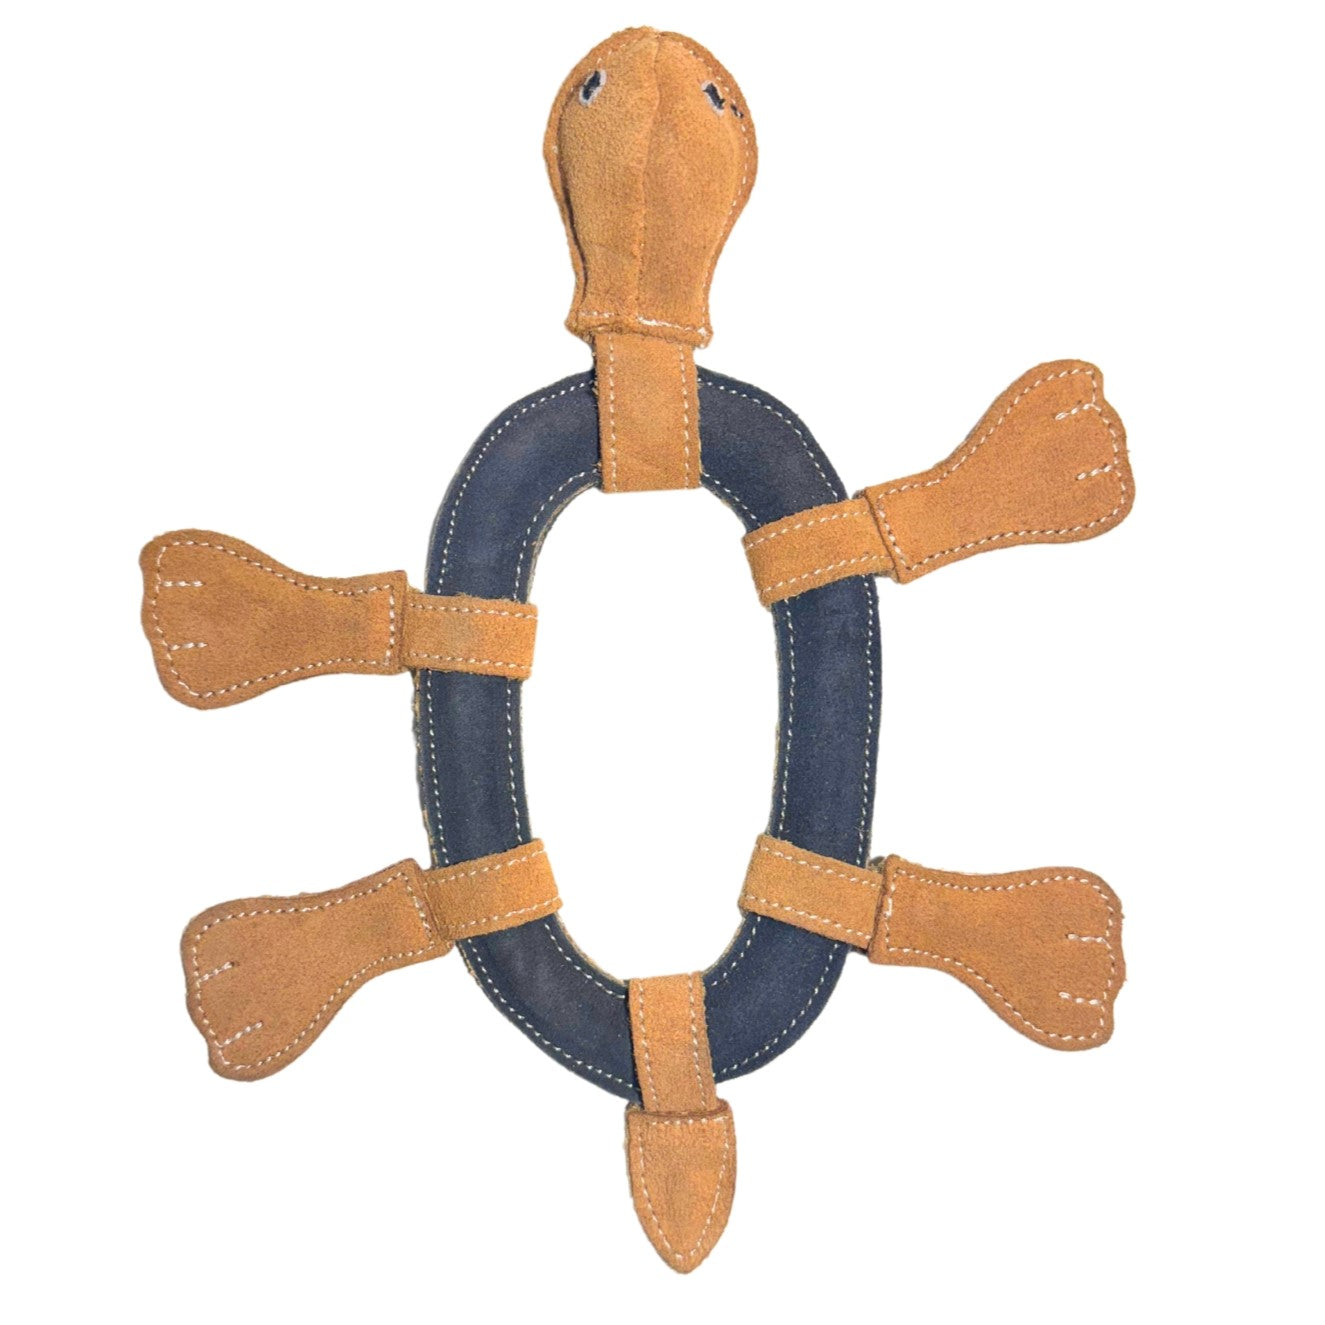 A durable dog chew toy in the shape of a steering wheel, made from buffalo suede, designed to withstand heavy chewing and provide entertainment for pets is the Georgie Paws Thomas the Turtle - natural & pink.